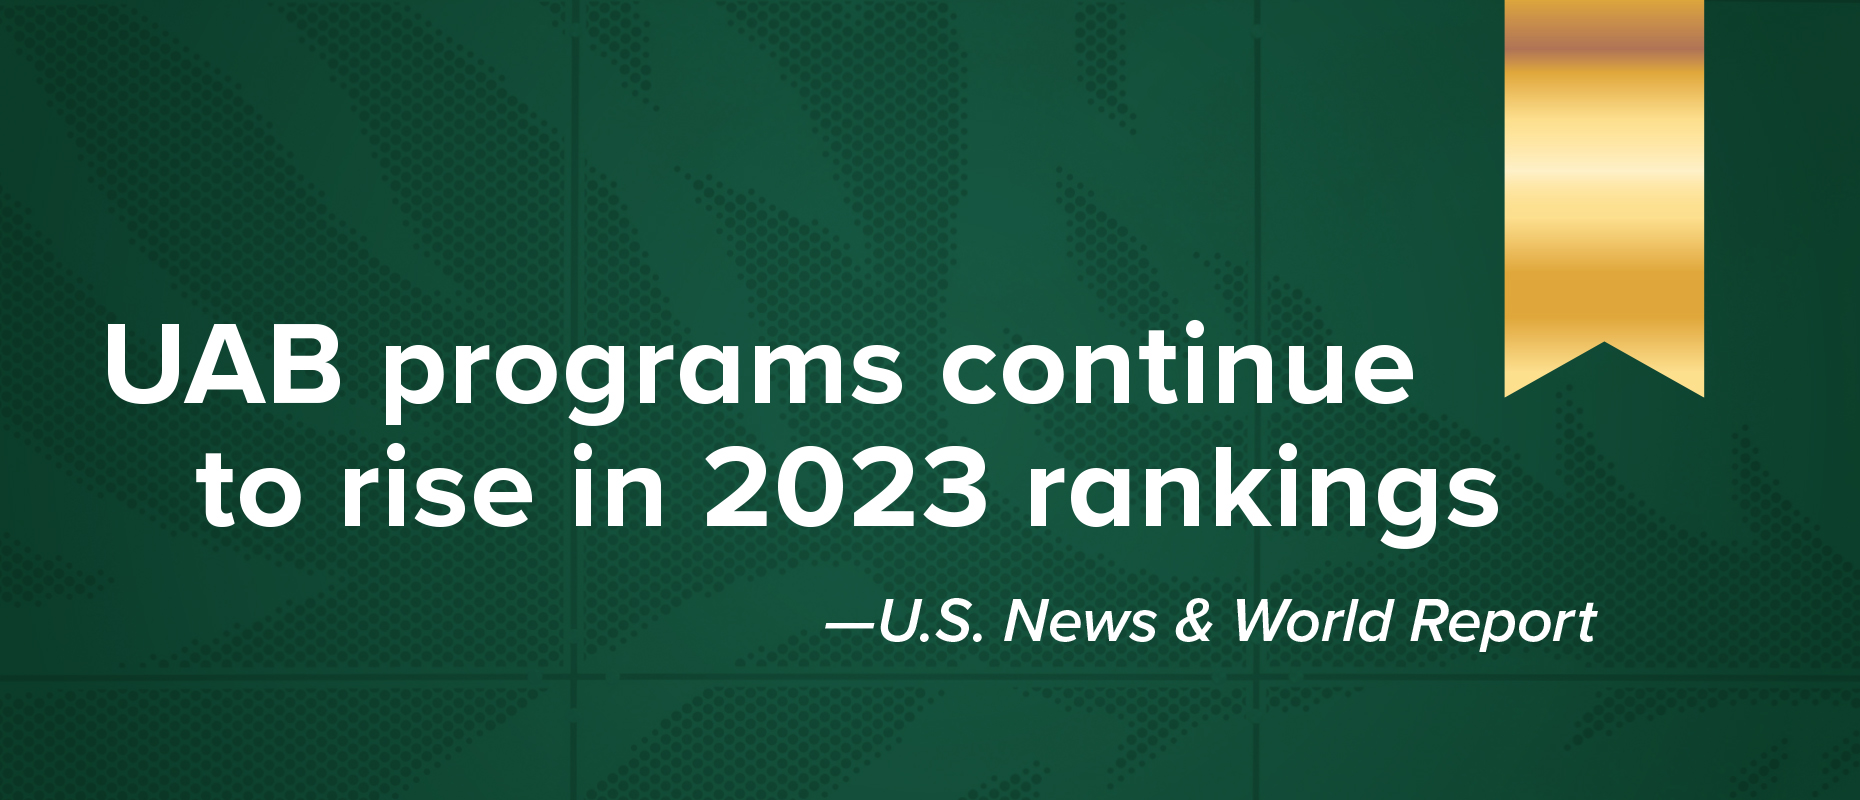 UAB programs continue to rise in 2023 rankings - U.S. News & World Report